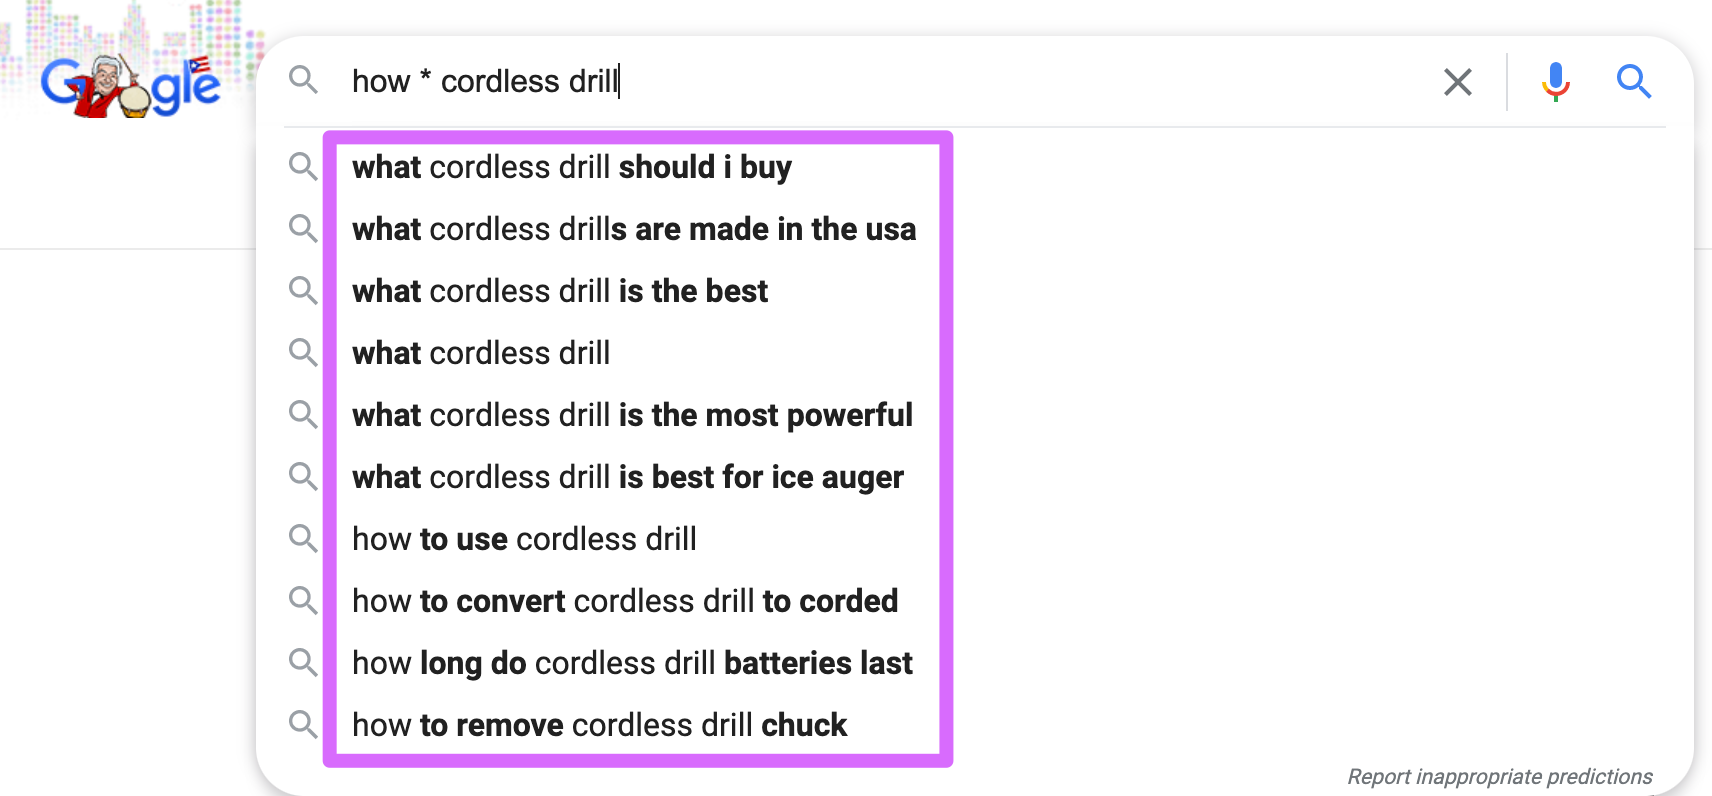 using the wild card asterisk with a how to query for cordless drills